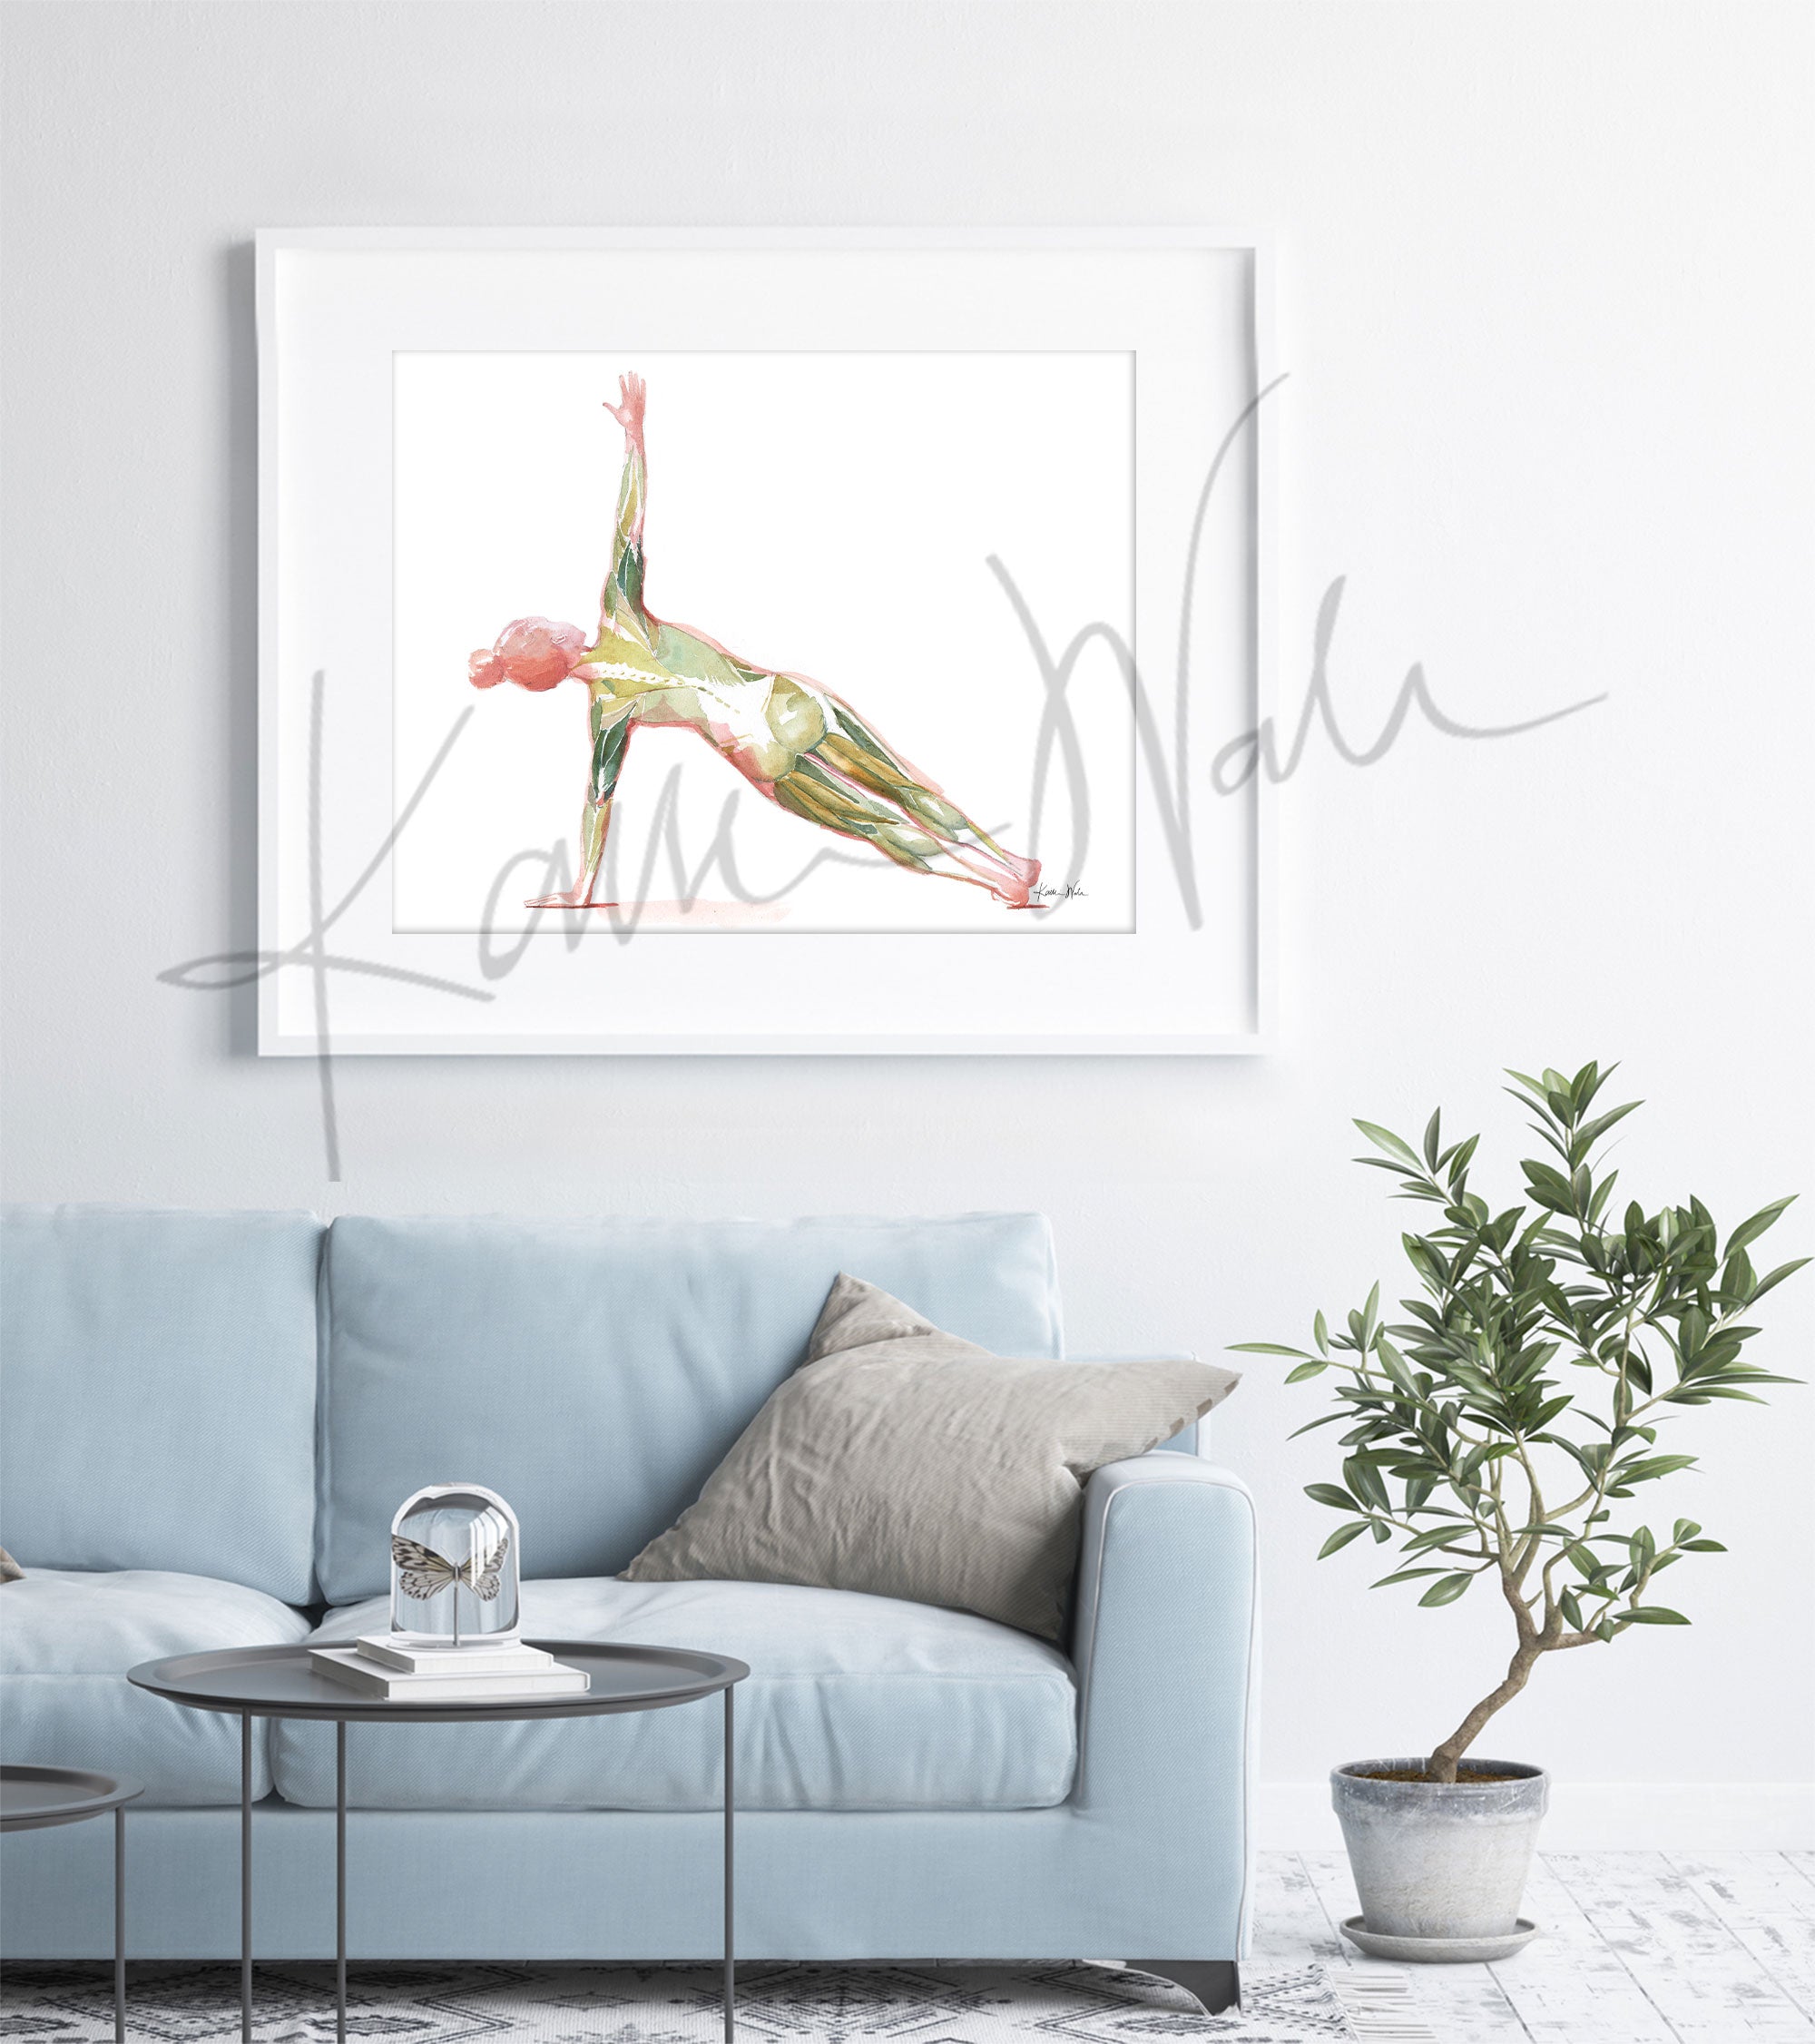 Framed watercolor painting of a woman performing the side plank yoga pose. The image shows her muscular anatomy while doing the pose. The painting is hanging over a blue couch.